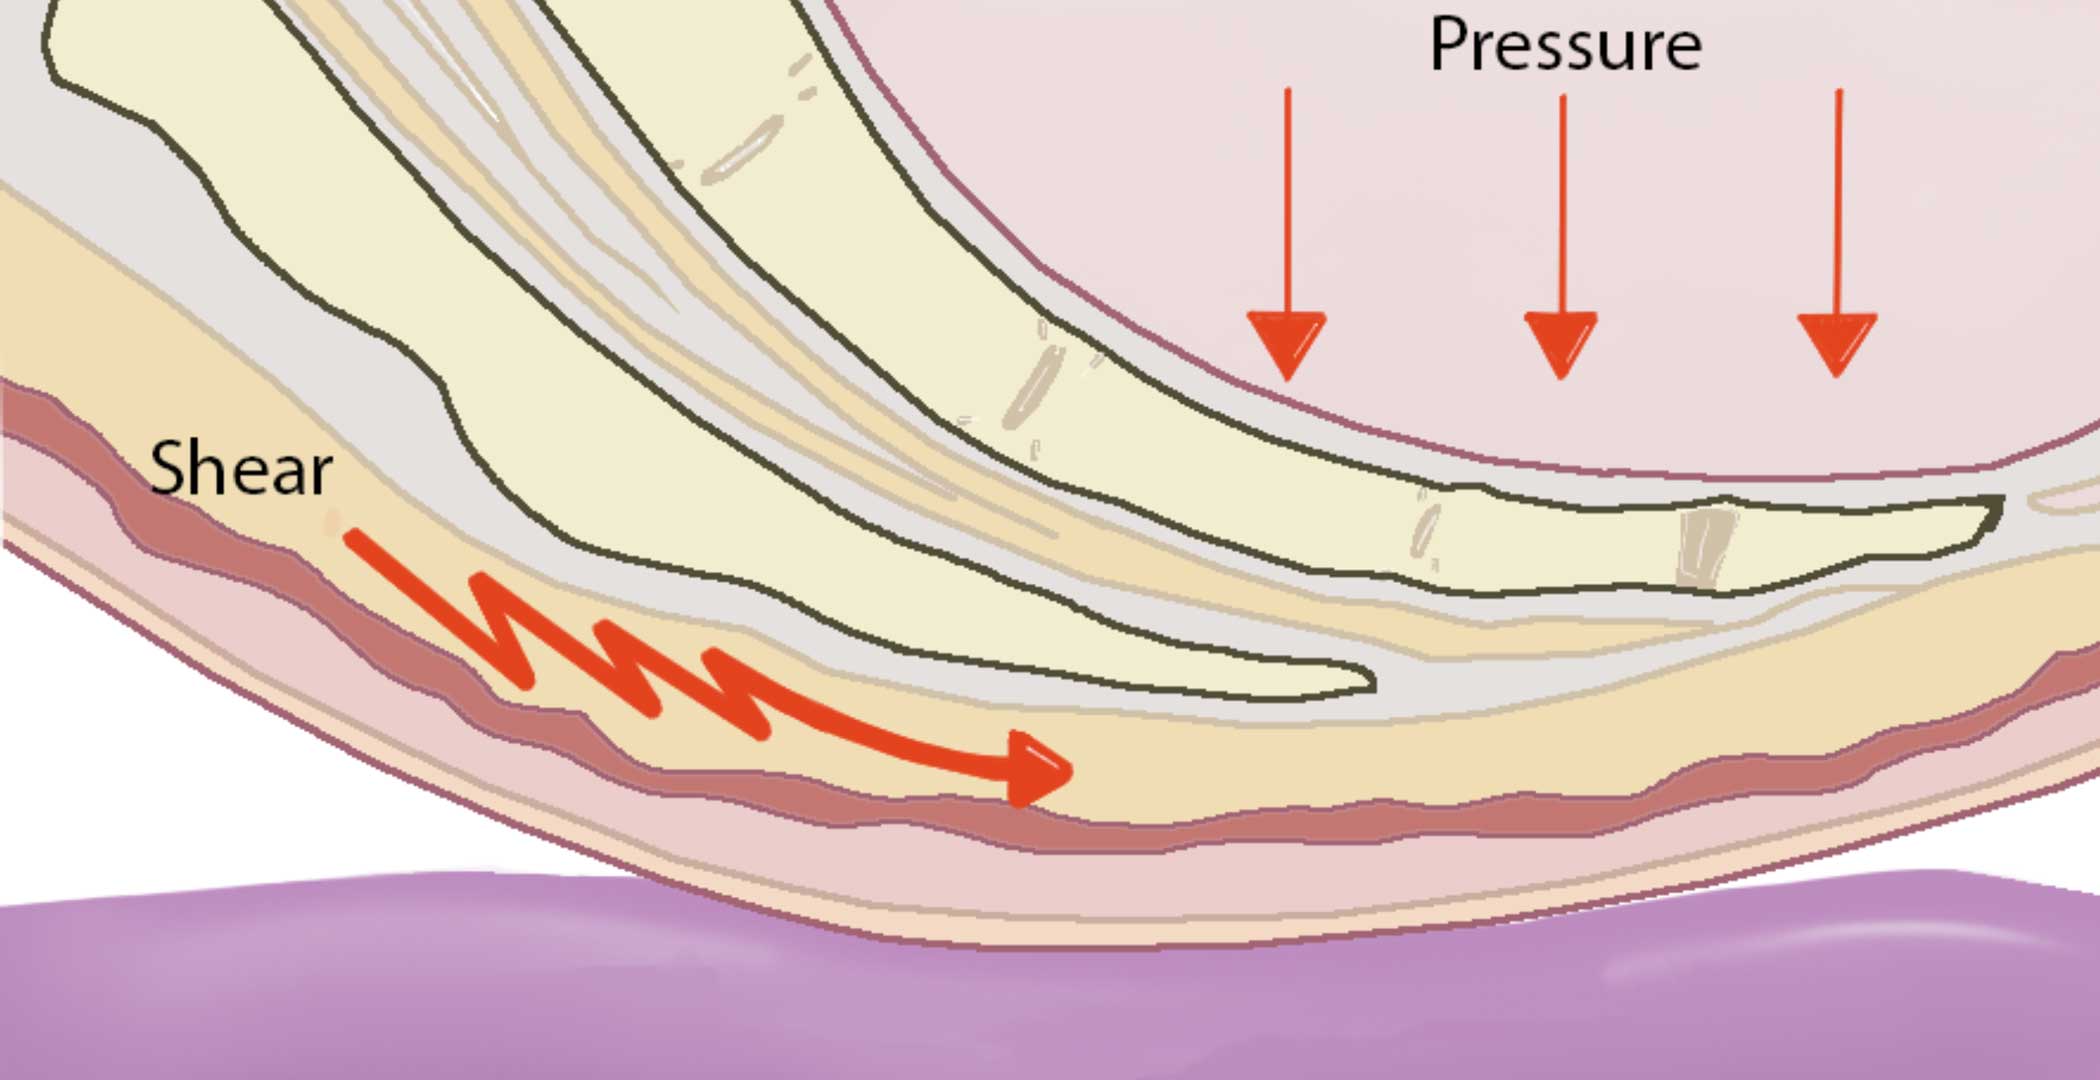 Shear reduction: An important element in pressure injury prevention